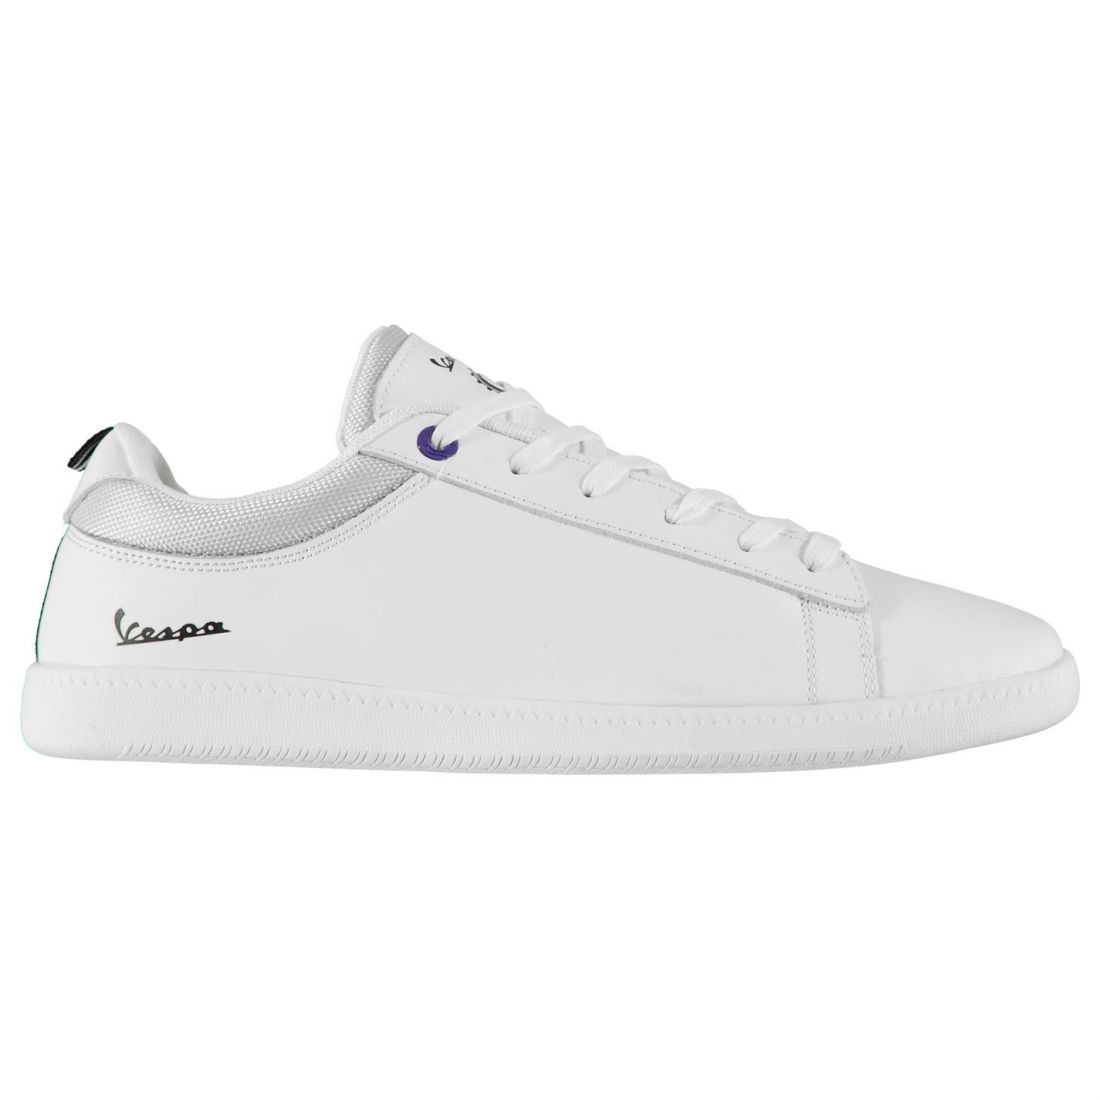 Lonsdale Beckton Sneakers Mens Gents 